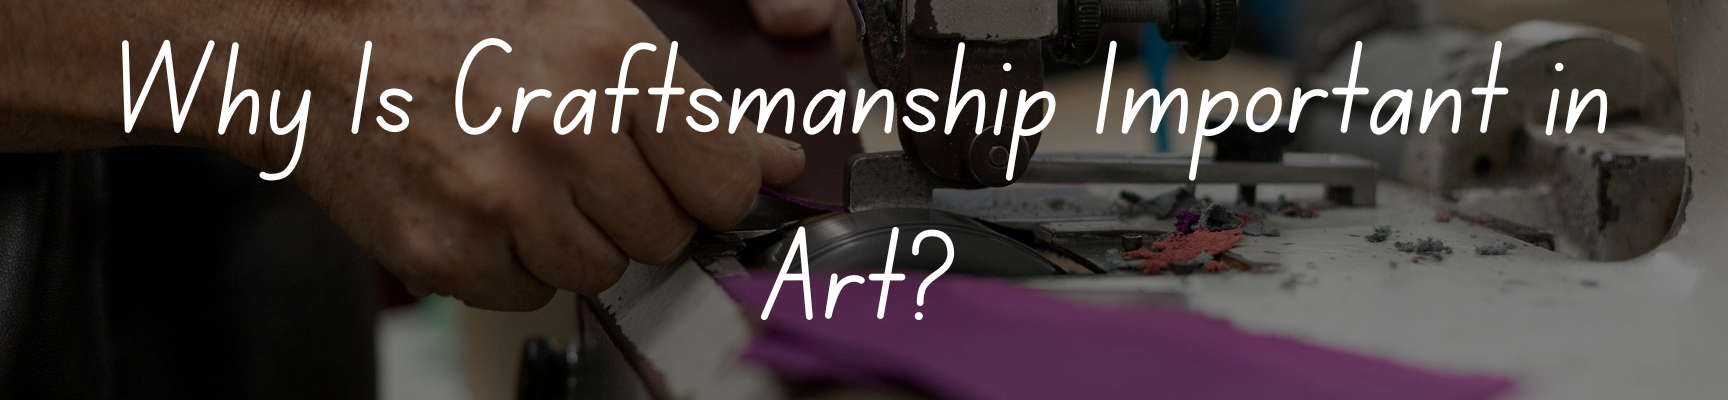 Why Is Craftsmanship Important in Art